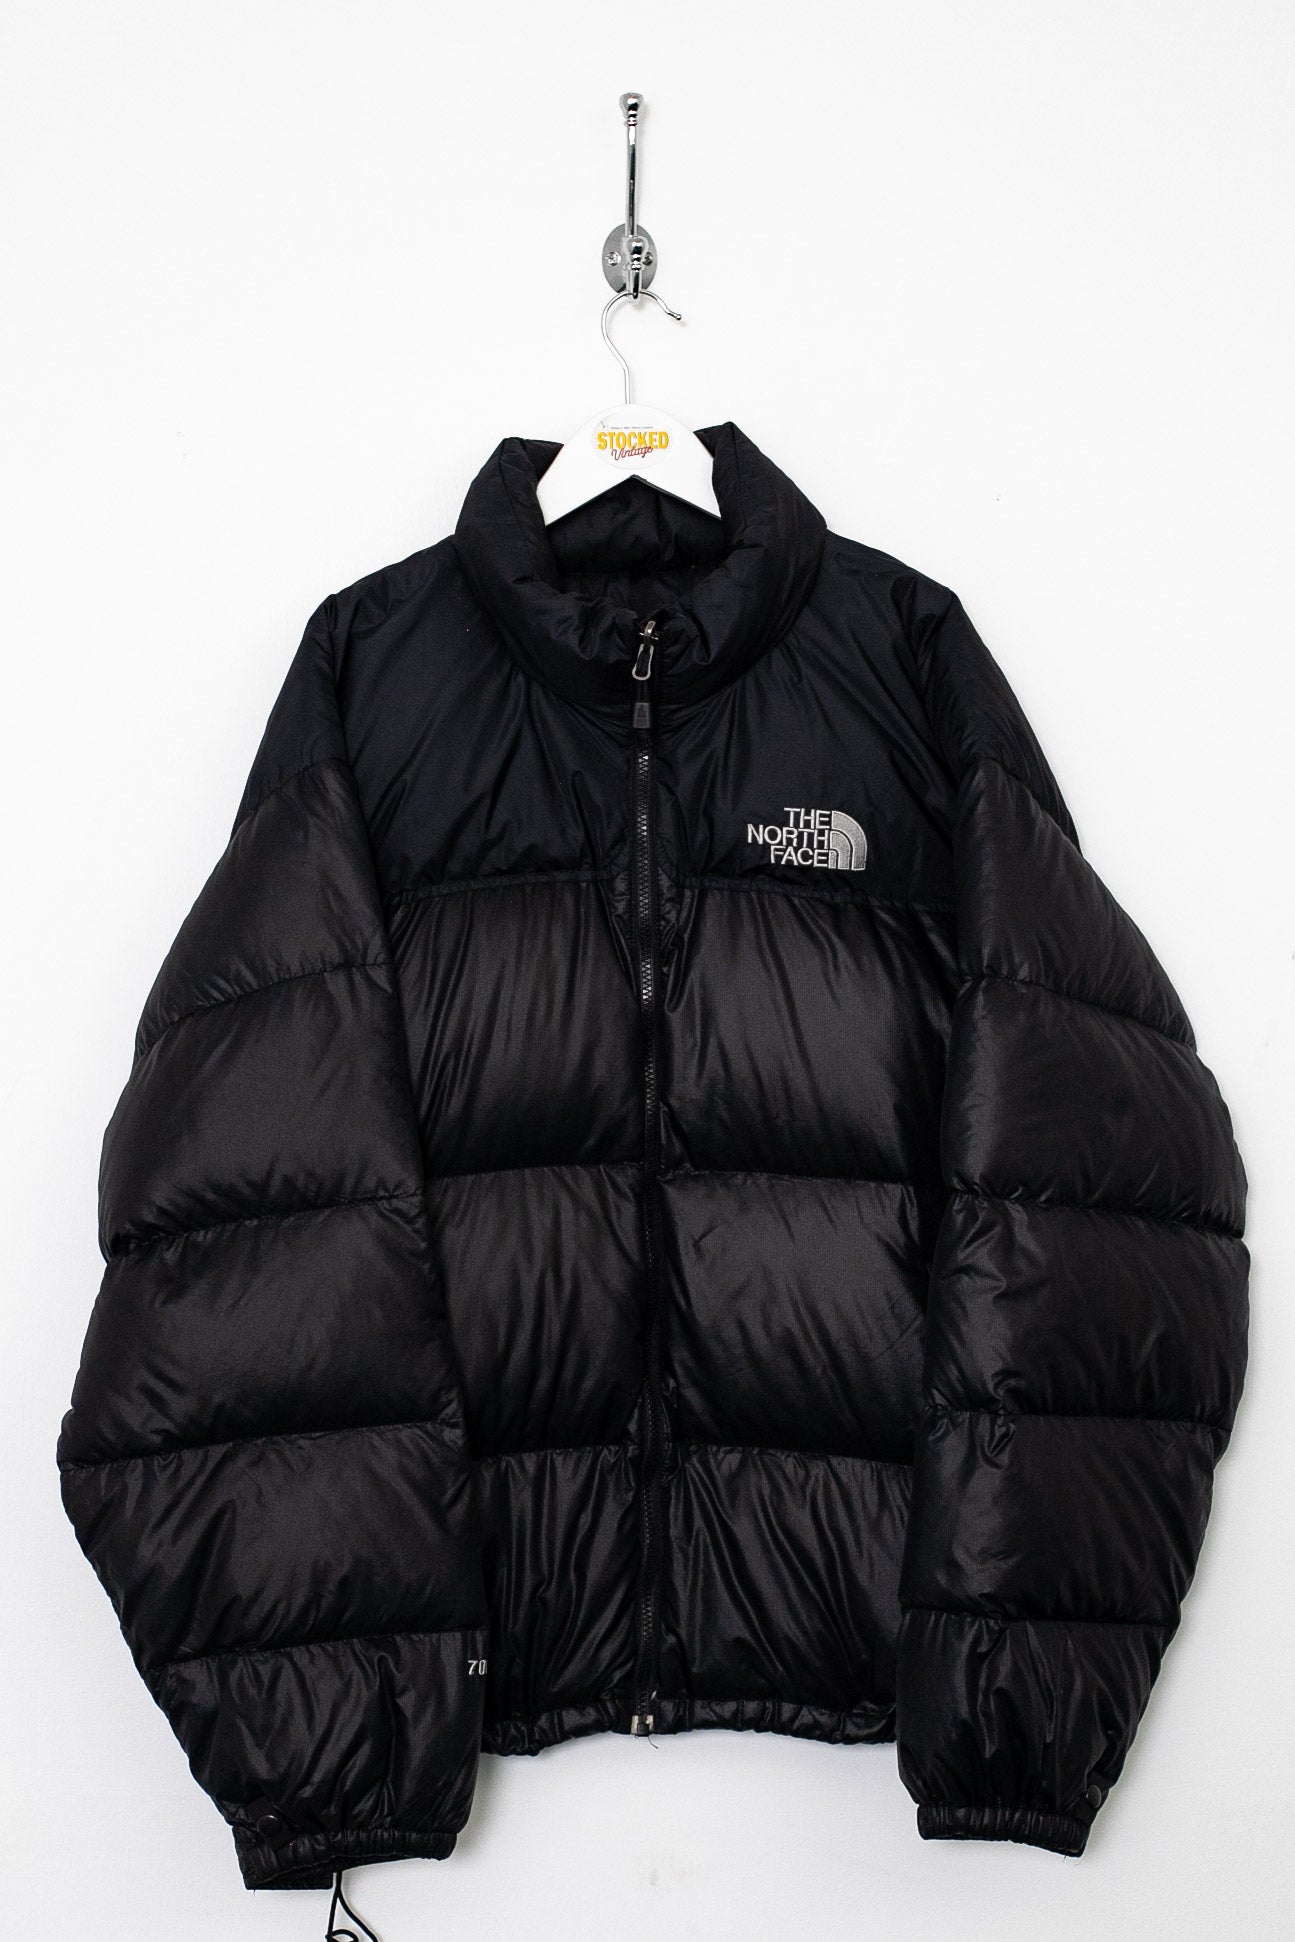 The North Face 700 Fill Nuptse Puffer Jacket (XL) – Stocked Vintage